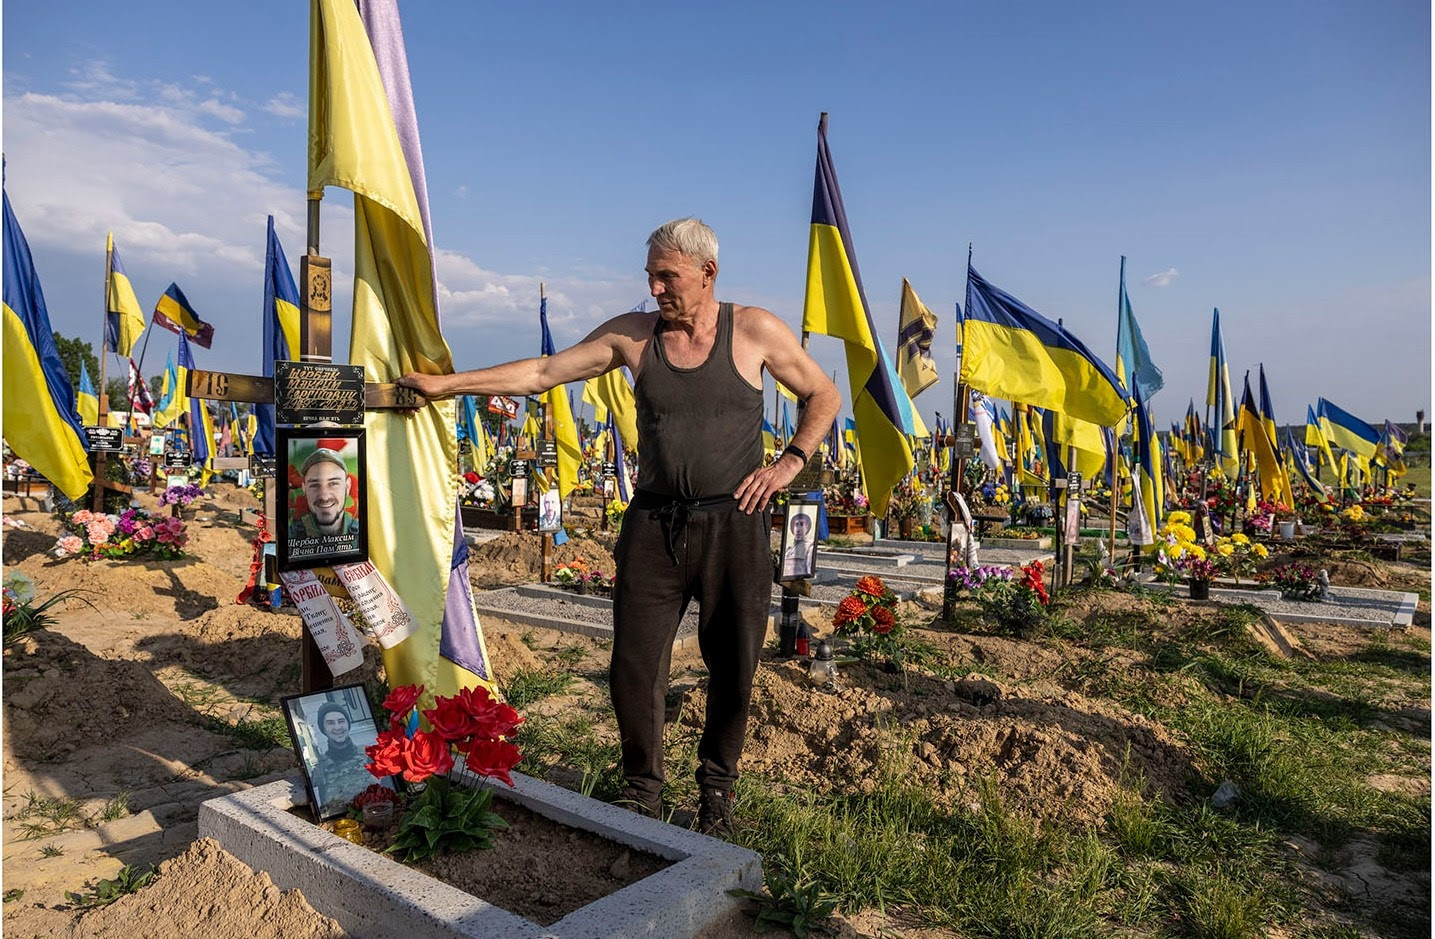 Vitaly Lenets, 61 yrs, a former grave digger who now looks after the graveyards at Kharkiv Cemetery